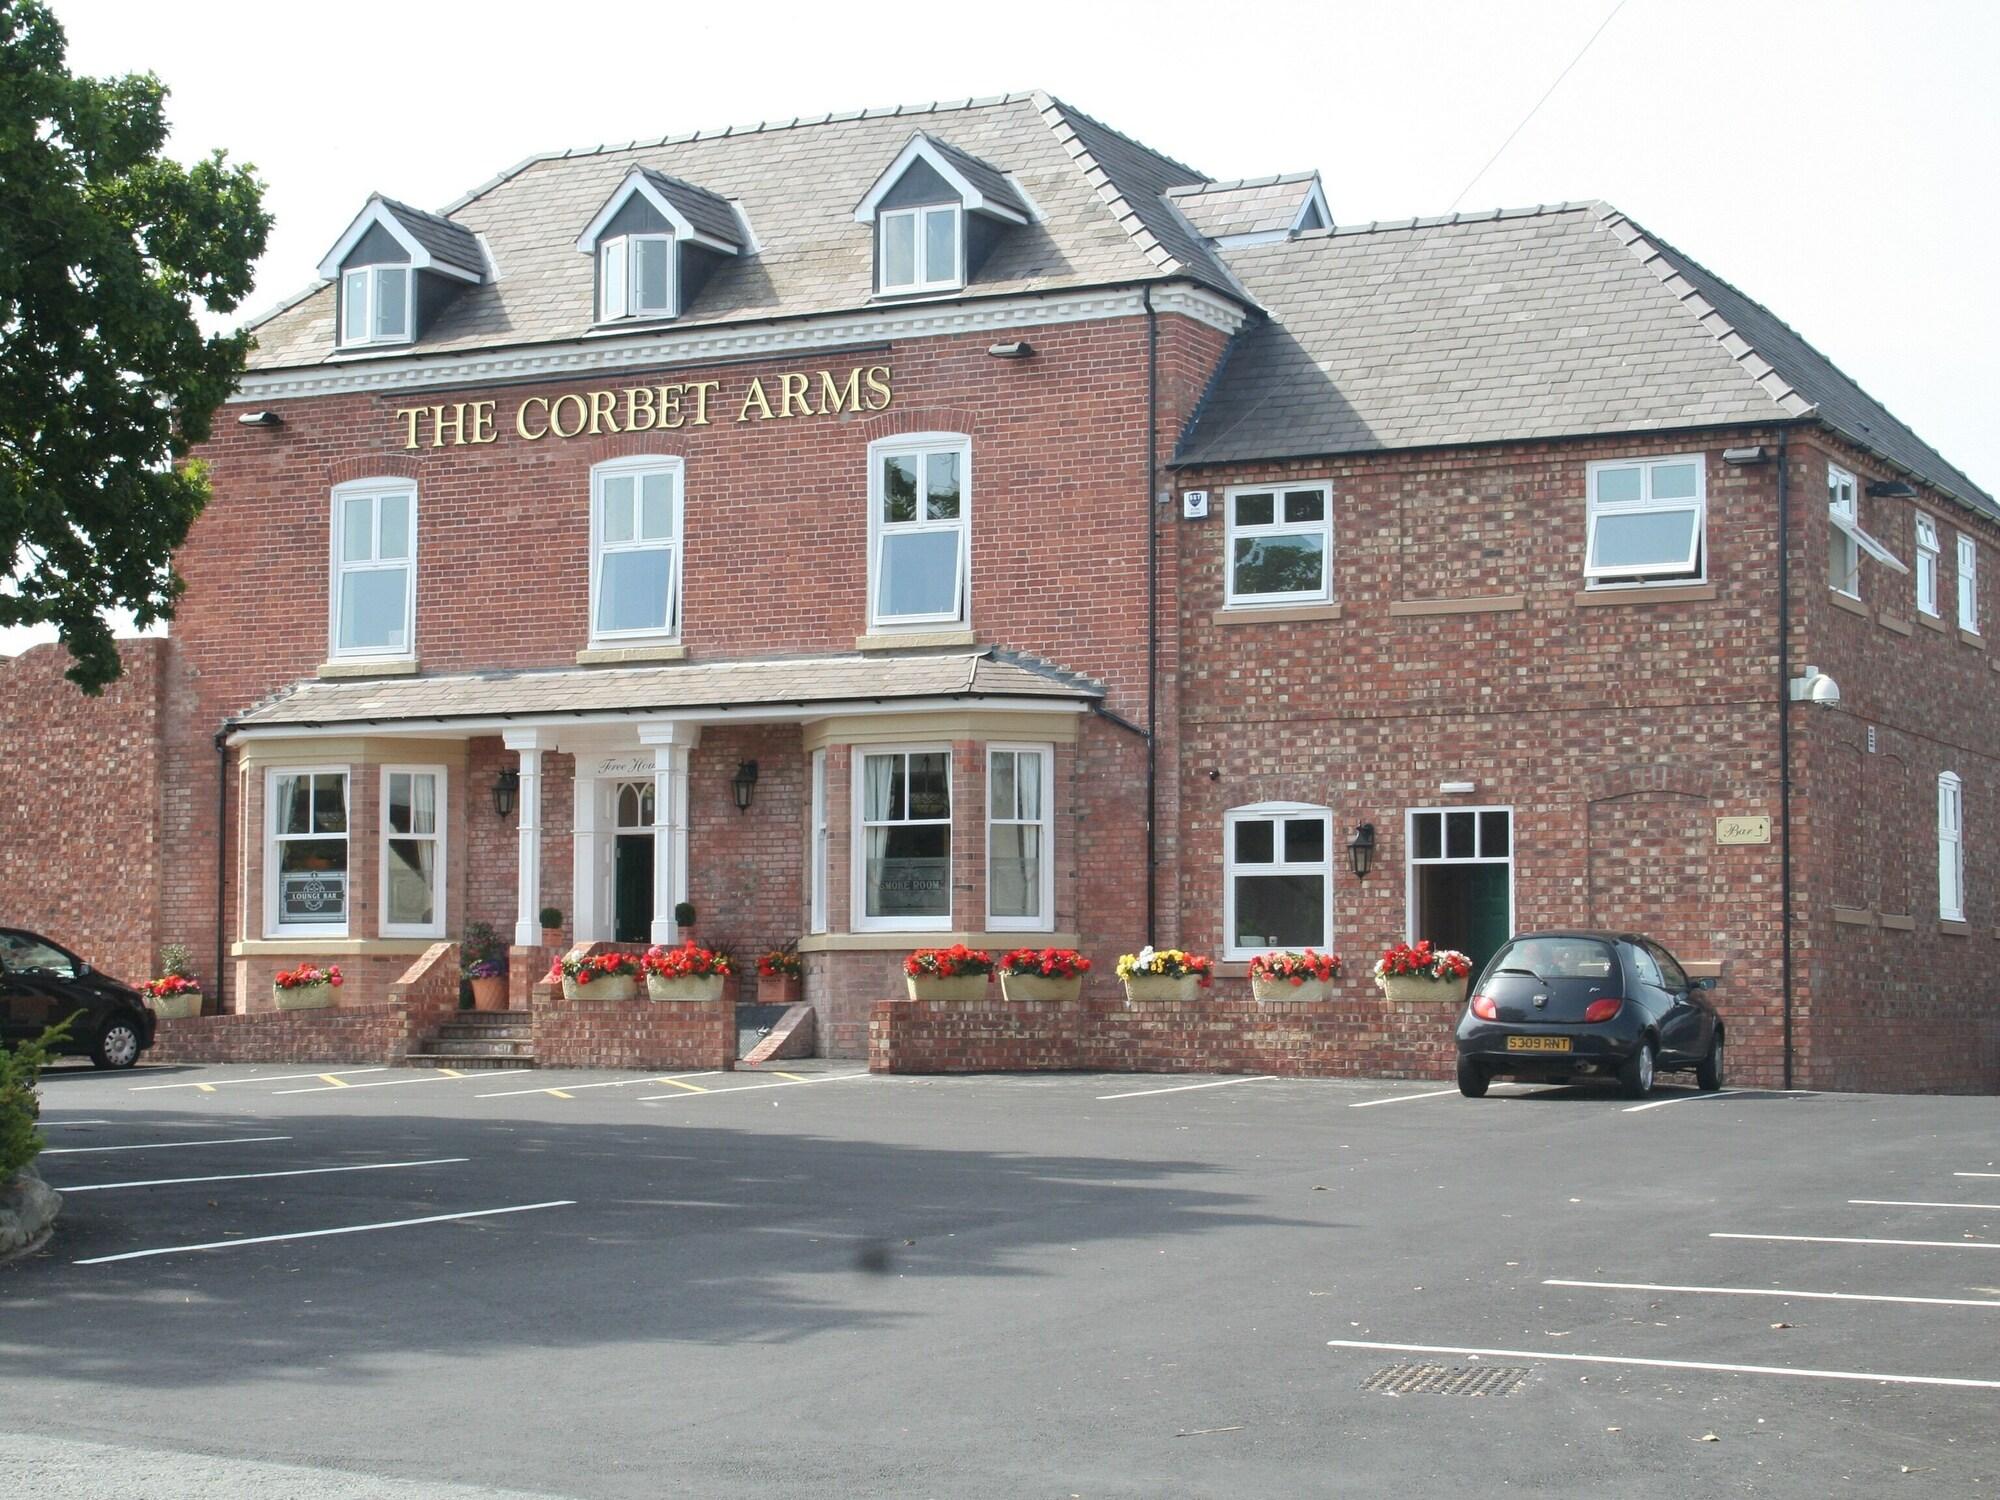 The Corbet Arms image